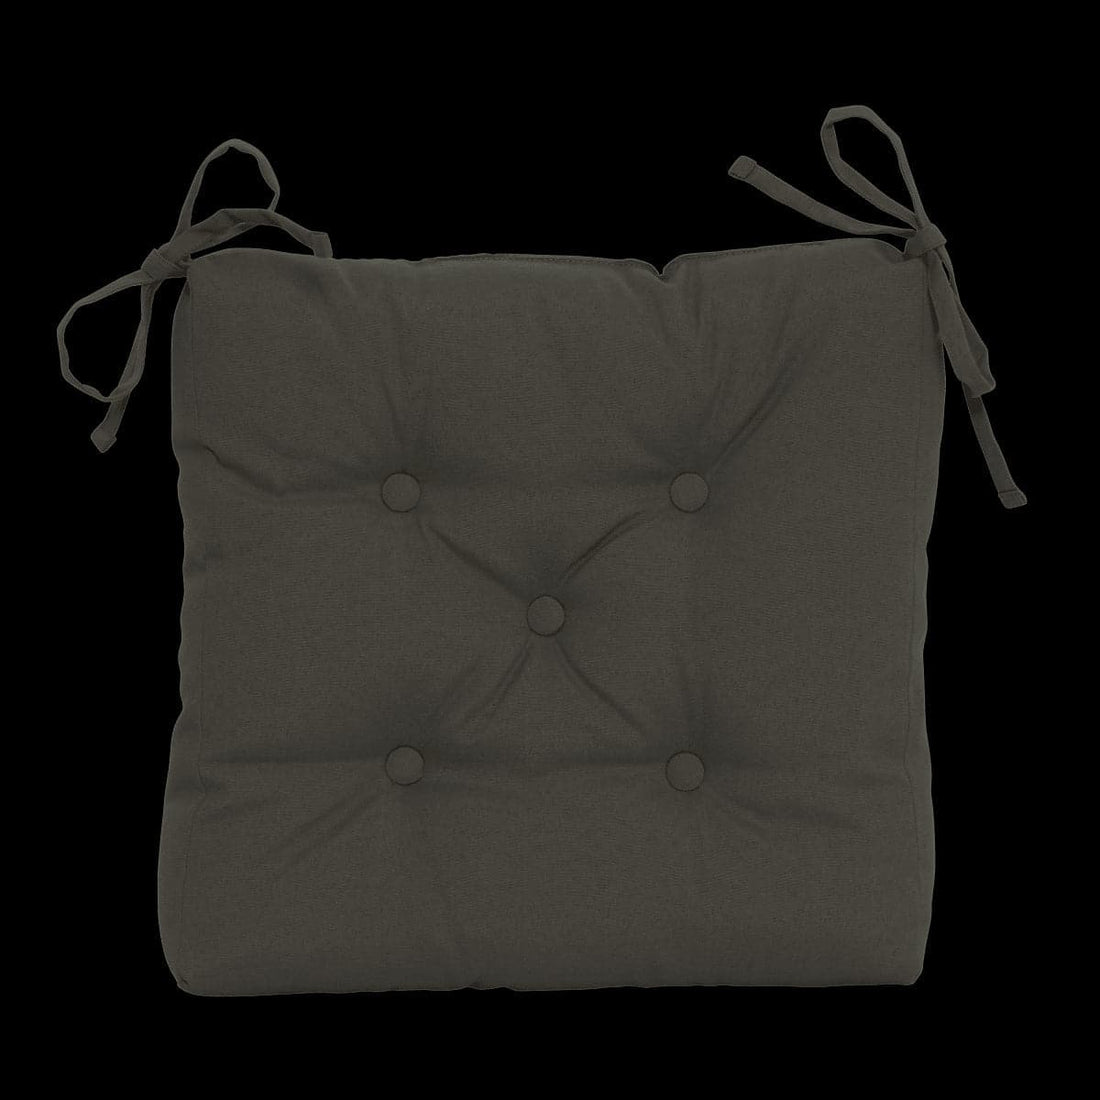 LUCK CHAIR COVER MOON GREY 40X40X6 CM POLYCOTTON - best price from Maltashopper.com BR480009552